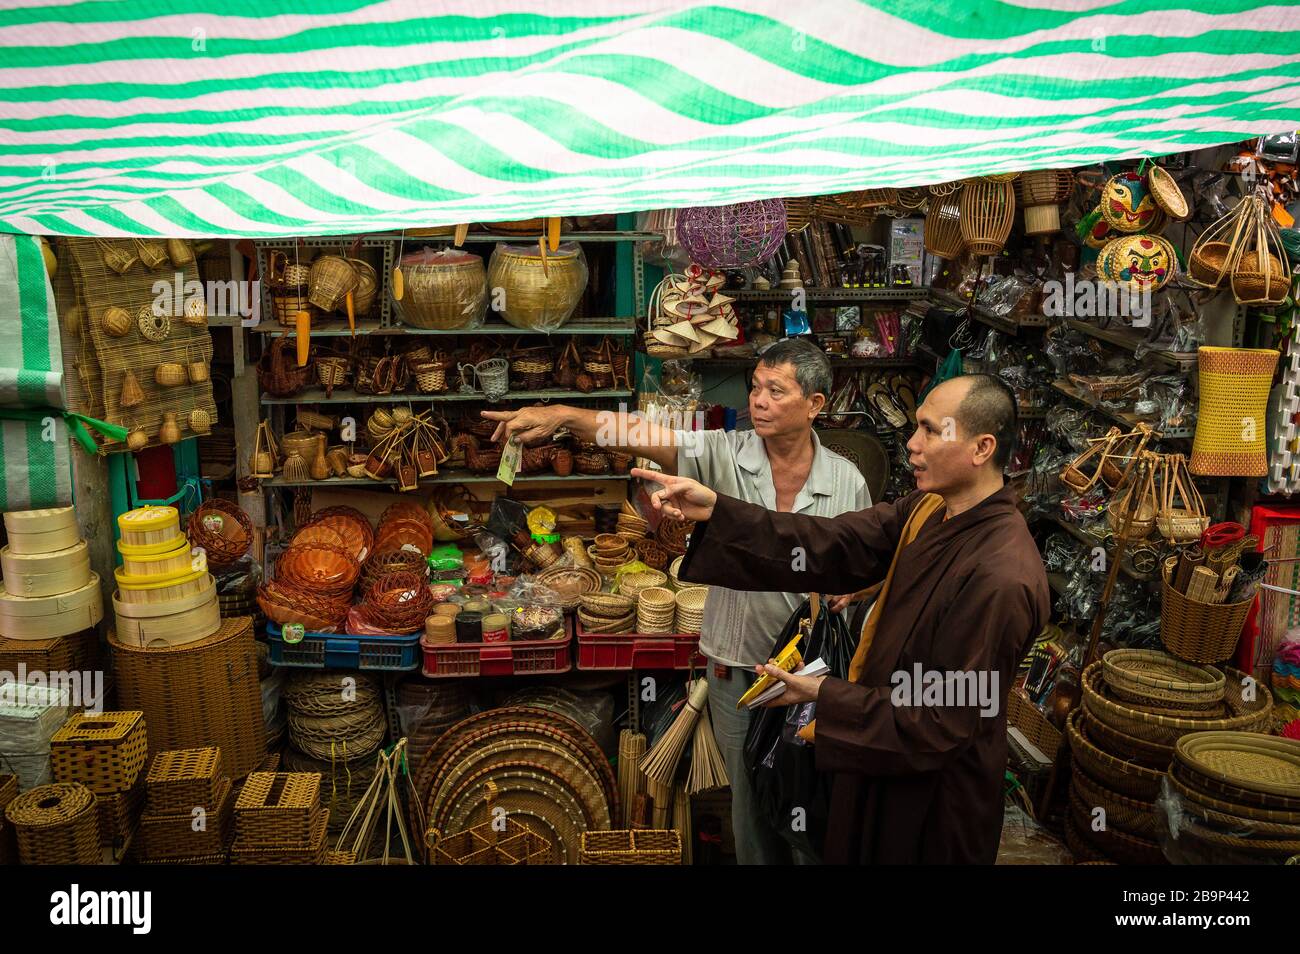 A shopkeeper giving directions in Binh Tay Market, Ho Chi Minh, Vietnam. Stock Photo